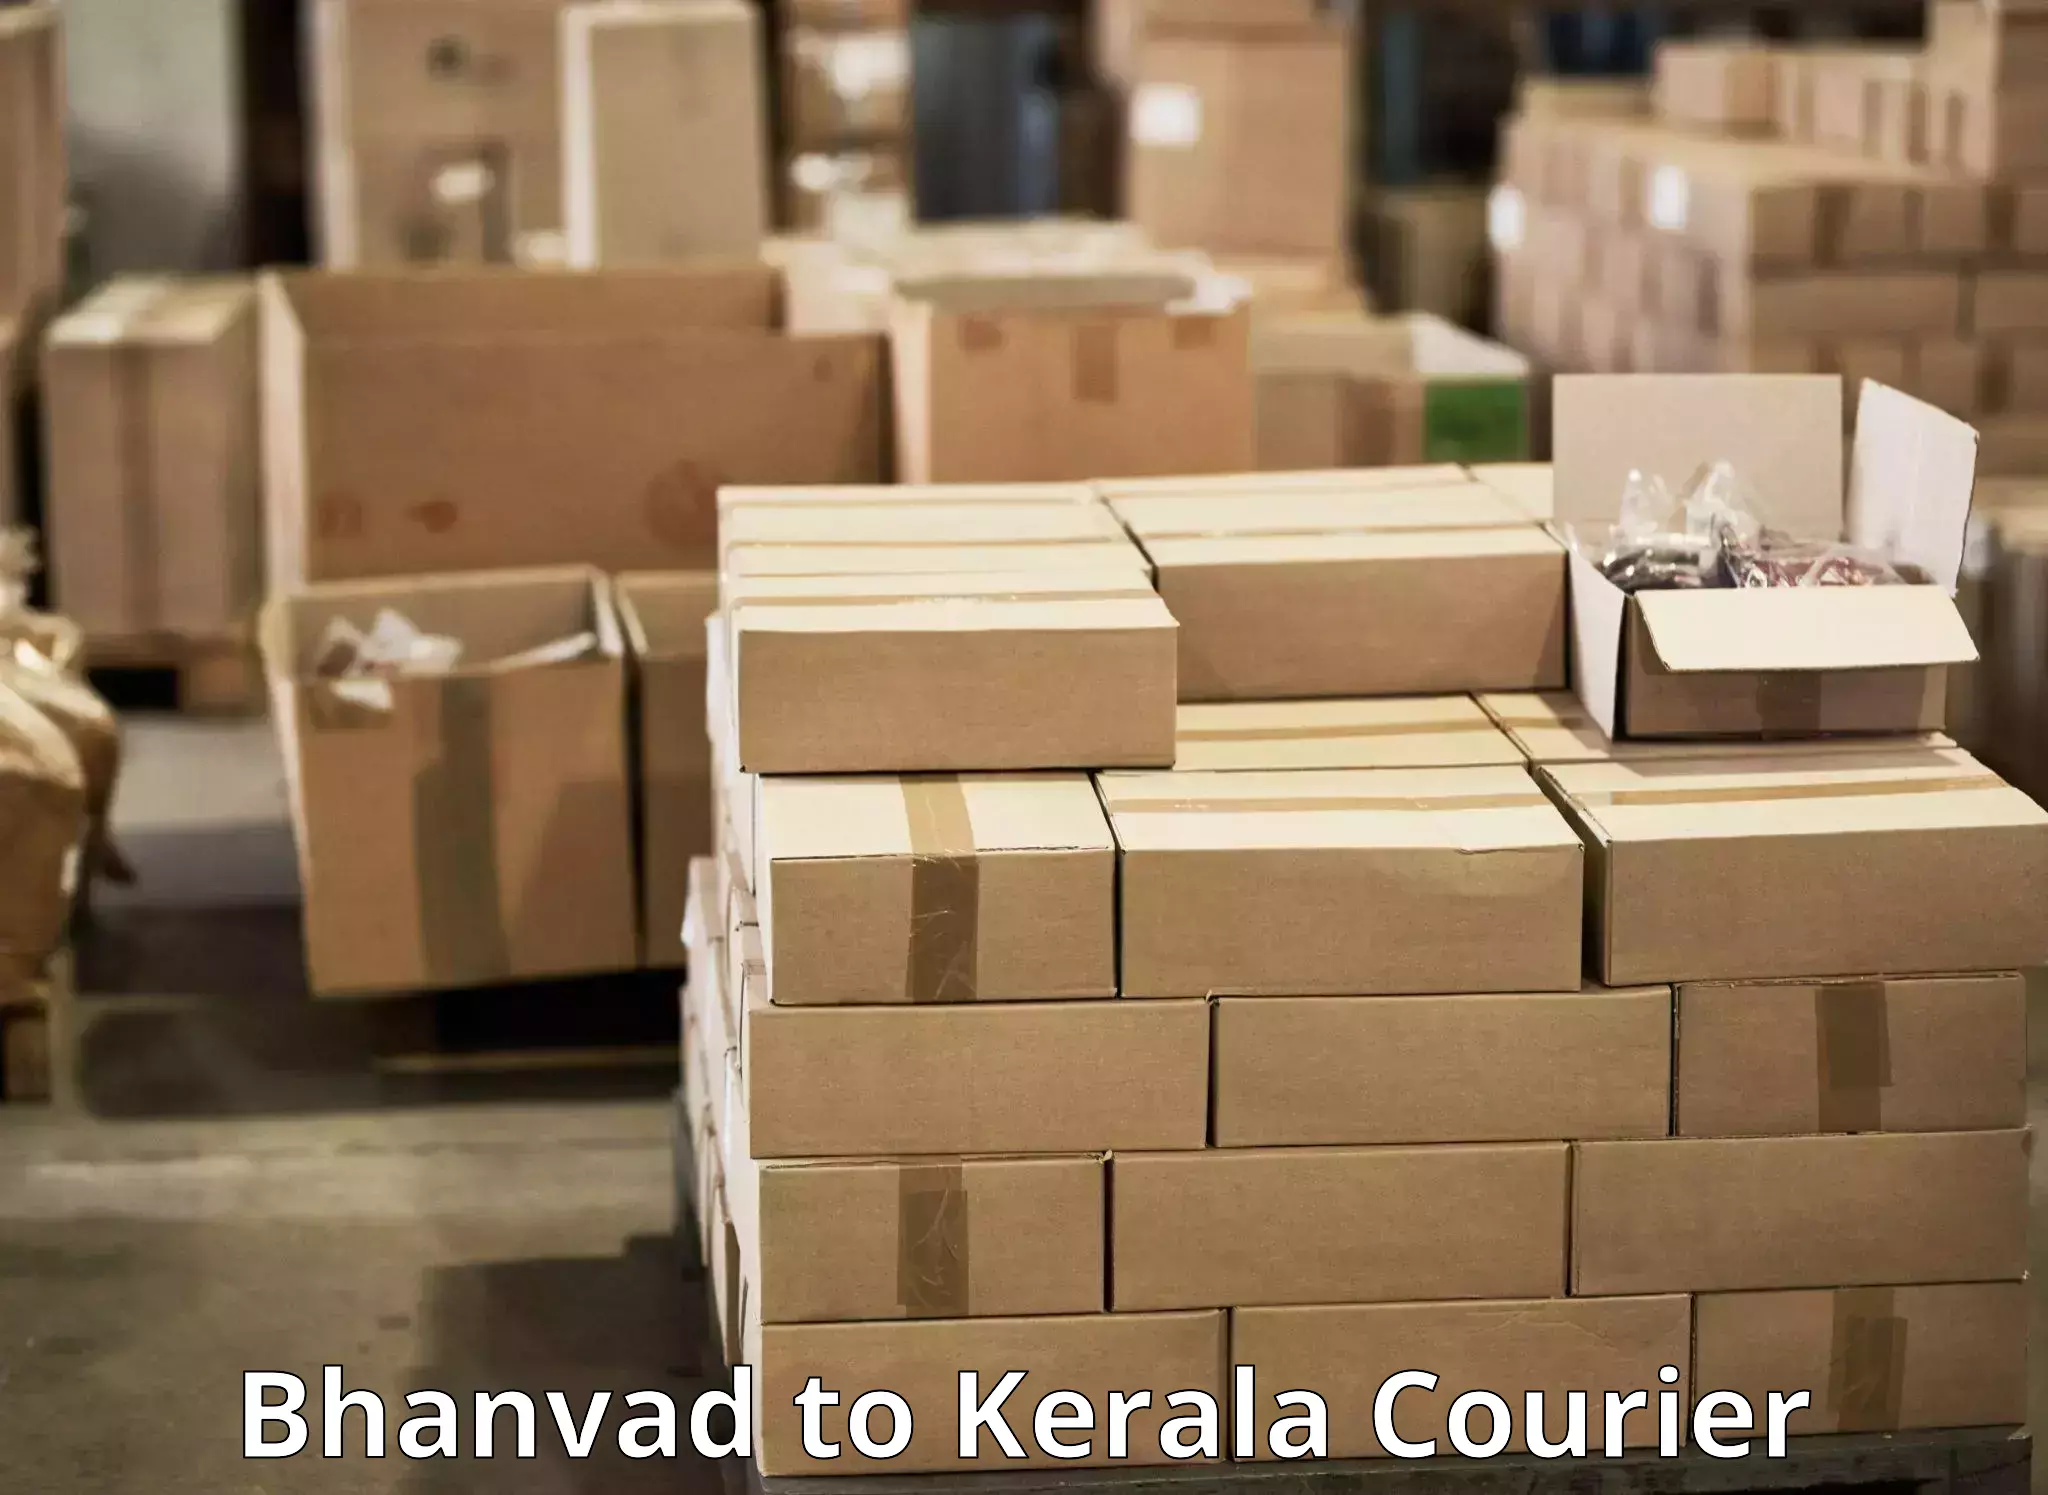 Shipping and handling Bhanvad to Cochin University of Science and Technology